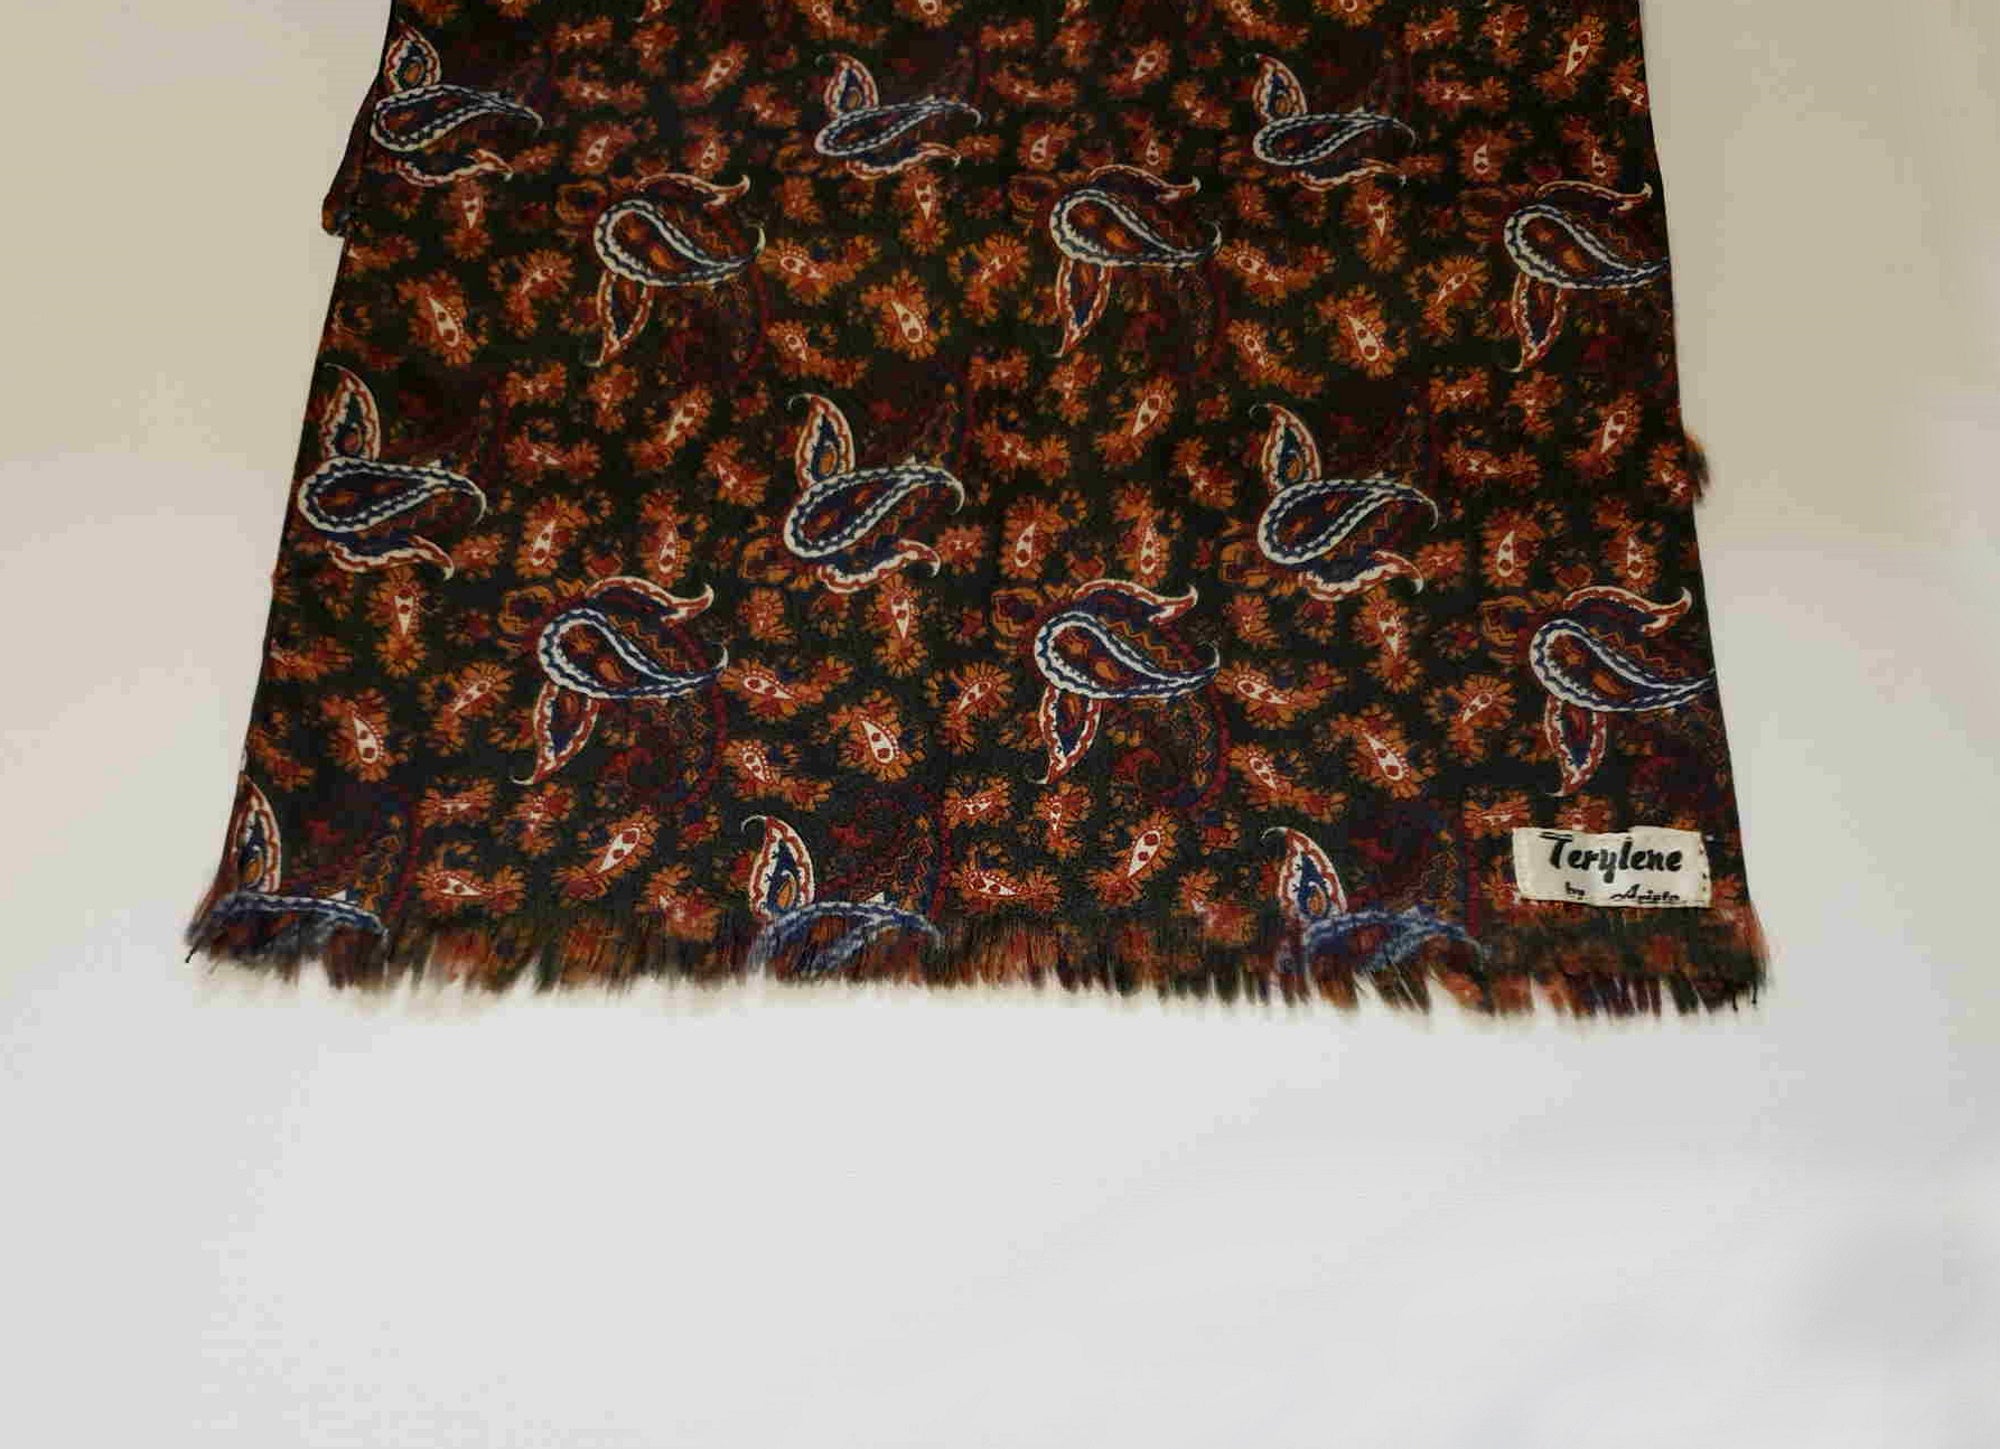 Black and Tan Paisley Dress Scarf by Aristo